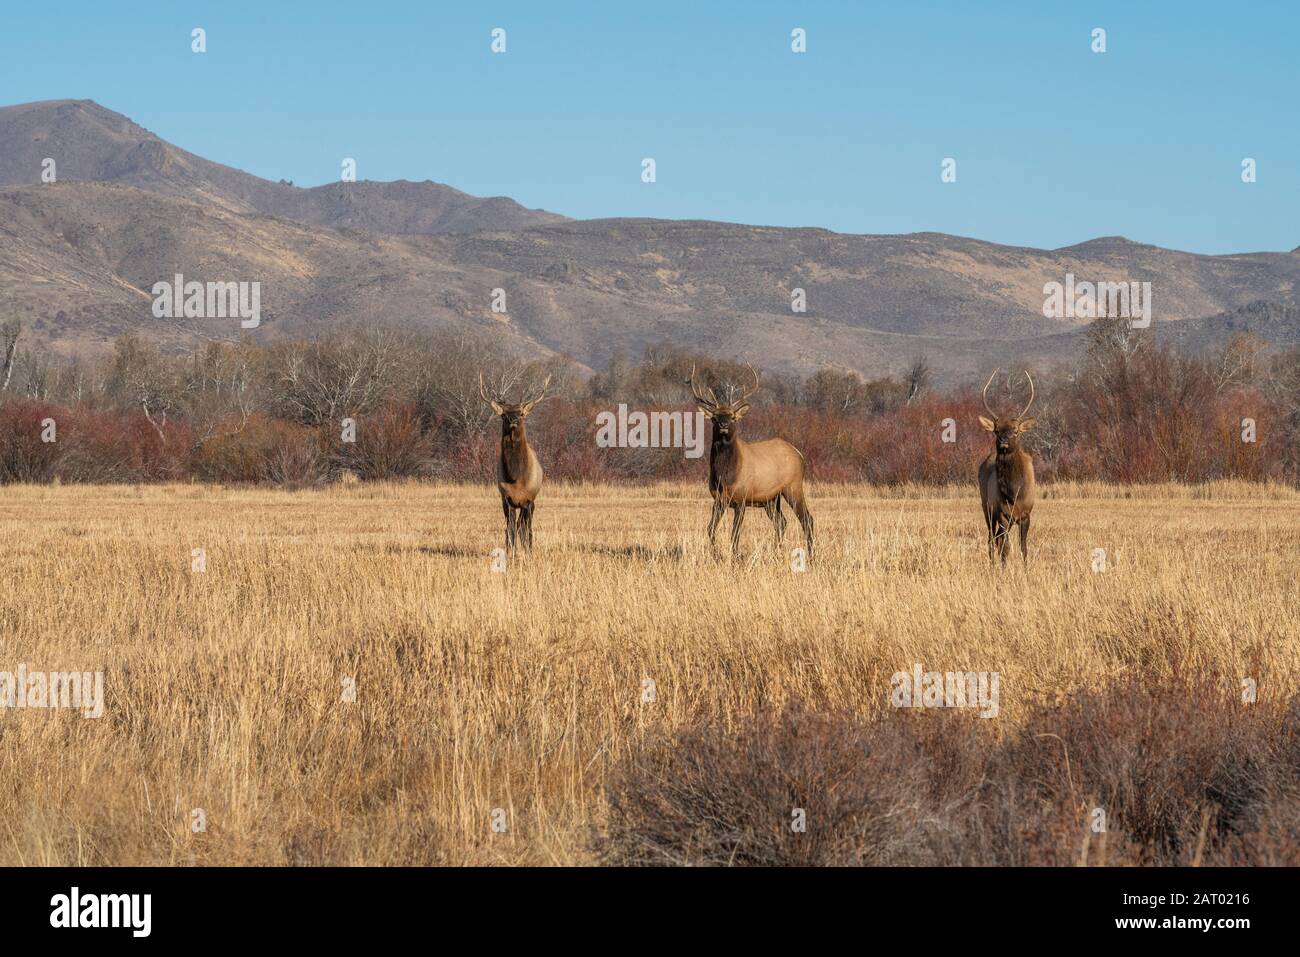 Elk in field by mountains Stock Photo